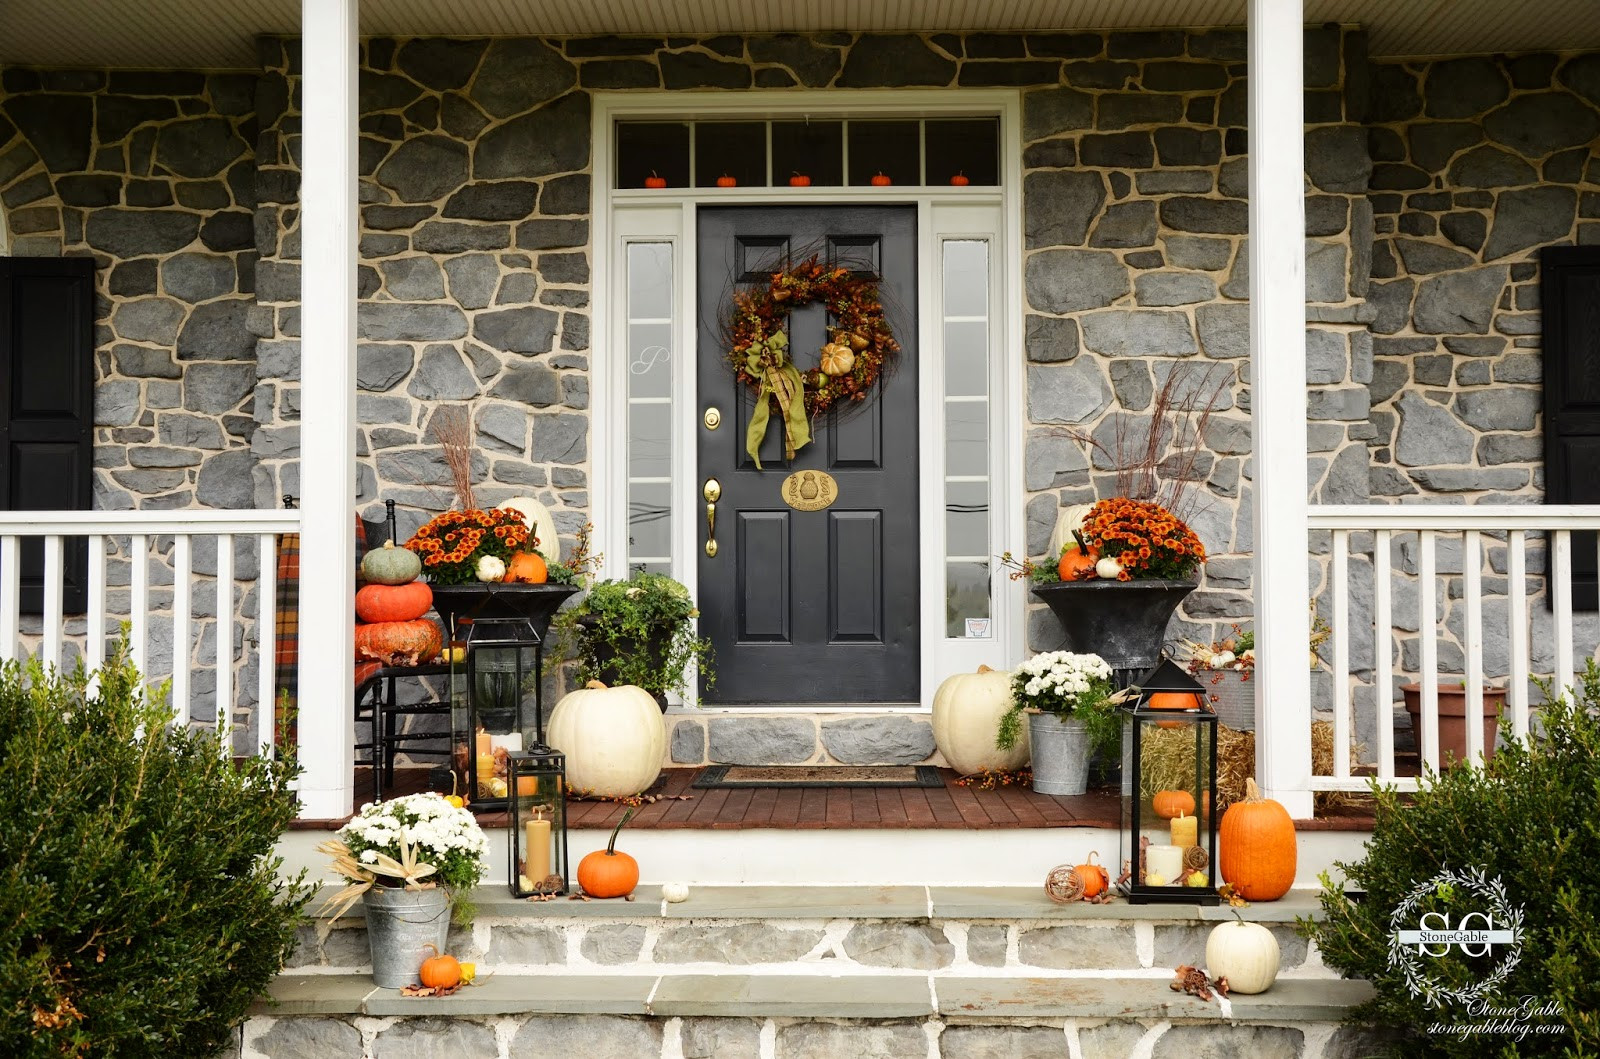 Front Porch Fall Decorating Ideas
 FALL ON THE FRONT PORCH StoneGable